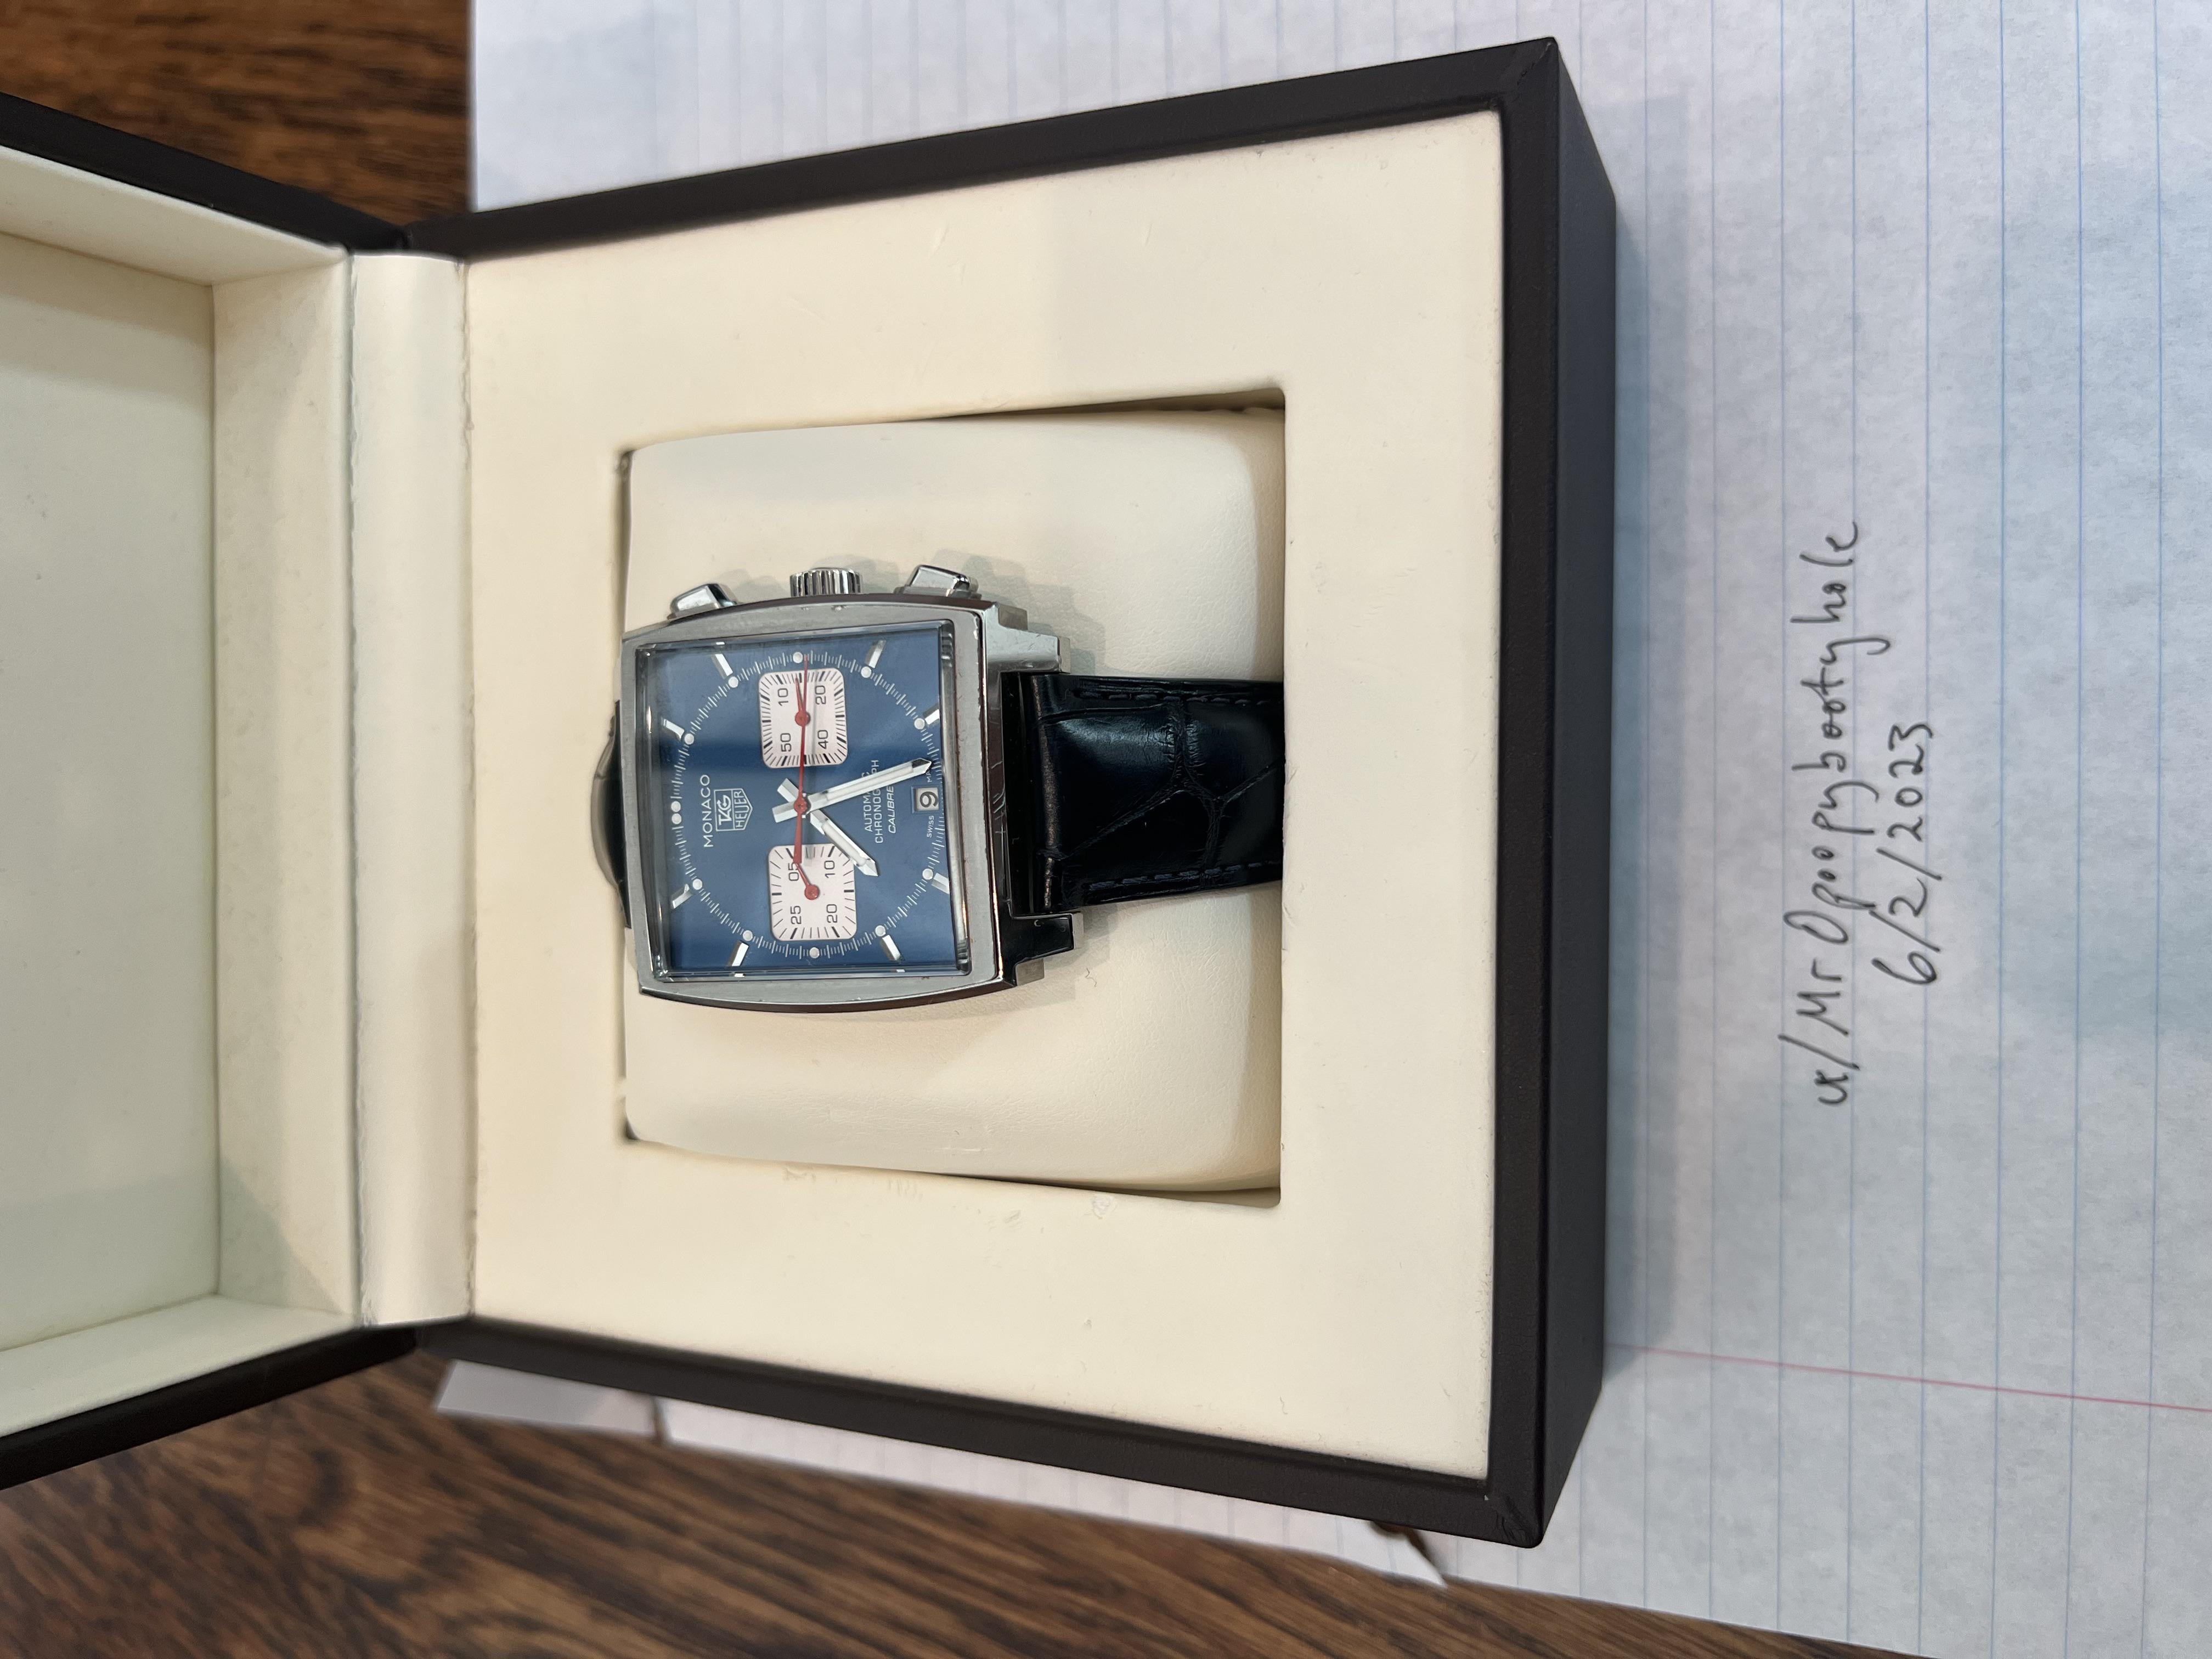 TAG Heuer Monaco Calibre 6 for $5,100 for sale from a Private